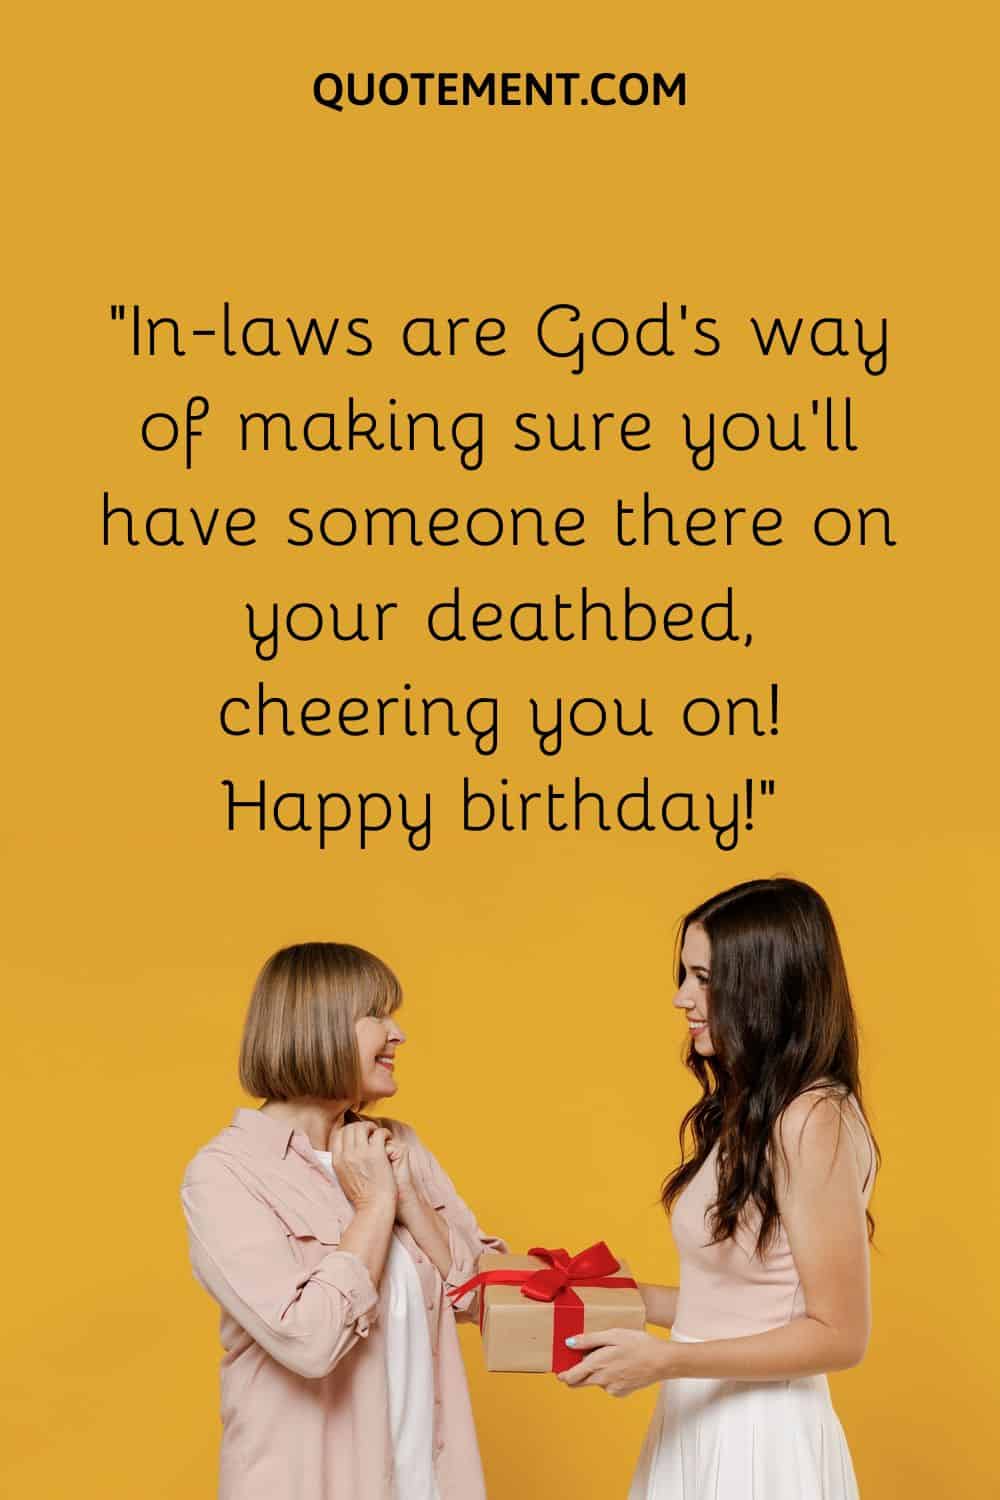 In-laws are God’s way of making sure you’ll have someone there on your deathbed, cheering you on